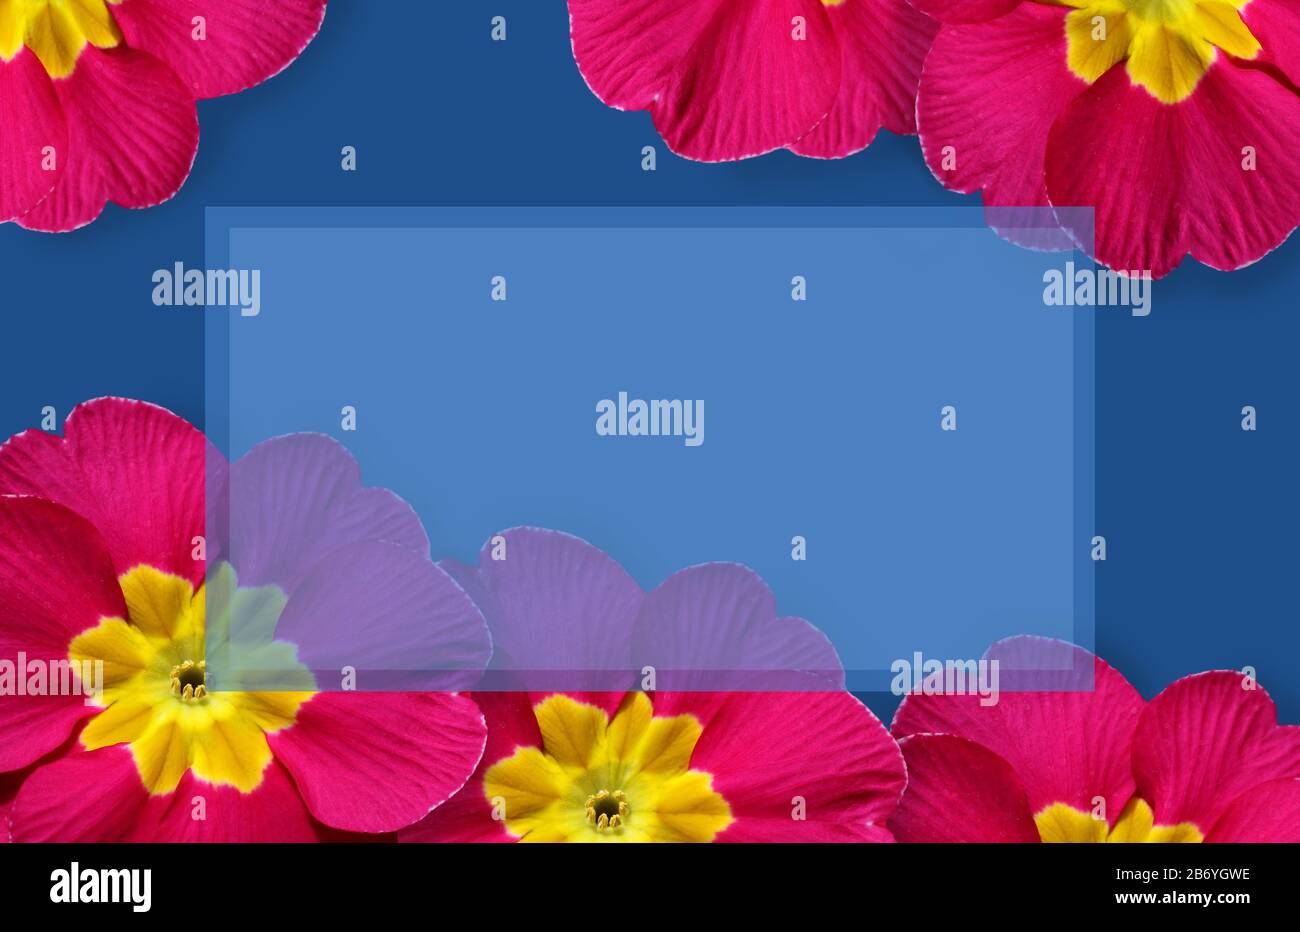 Vibrant Spring flowers frame, bright cerise pink primulas on a classic blue background. Central copyspace in light blue. Stock Photo